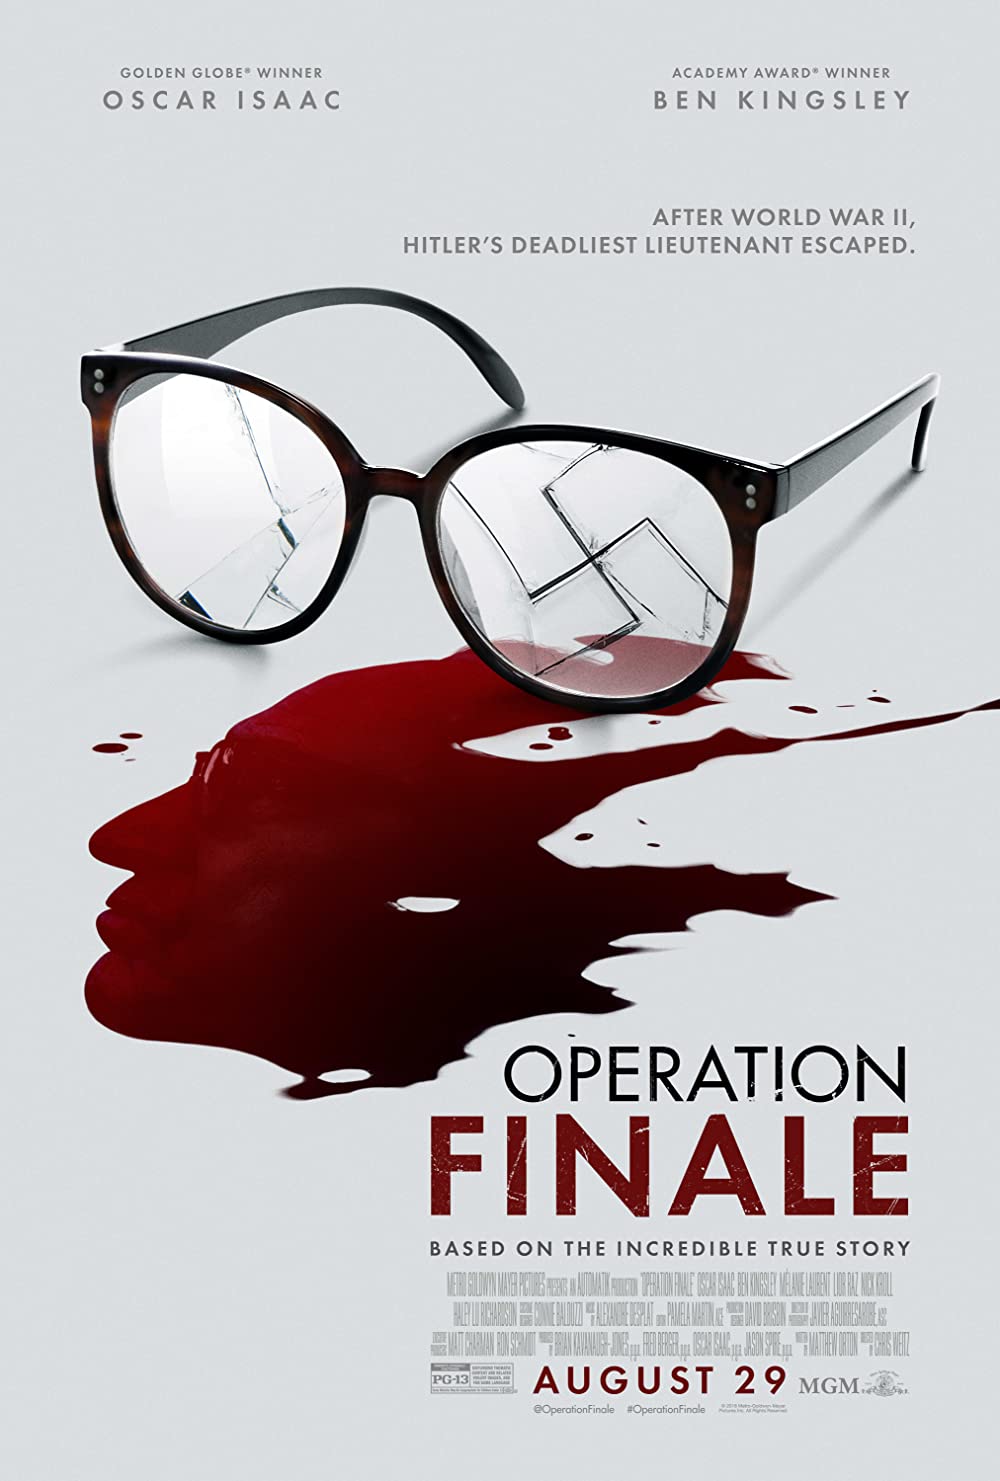 Movie Monday Film Discussion: Operation Finale